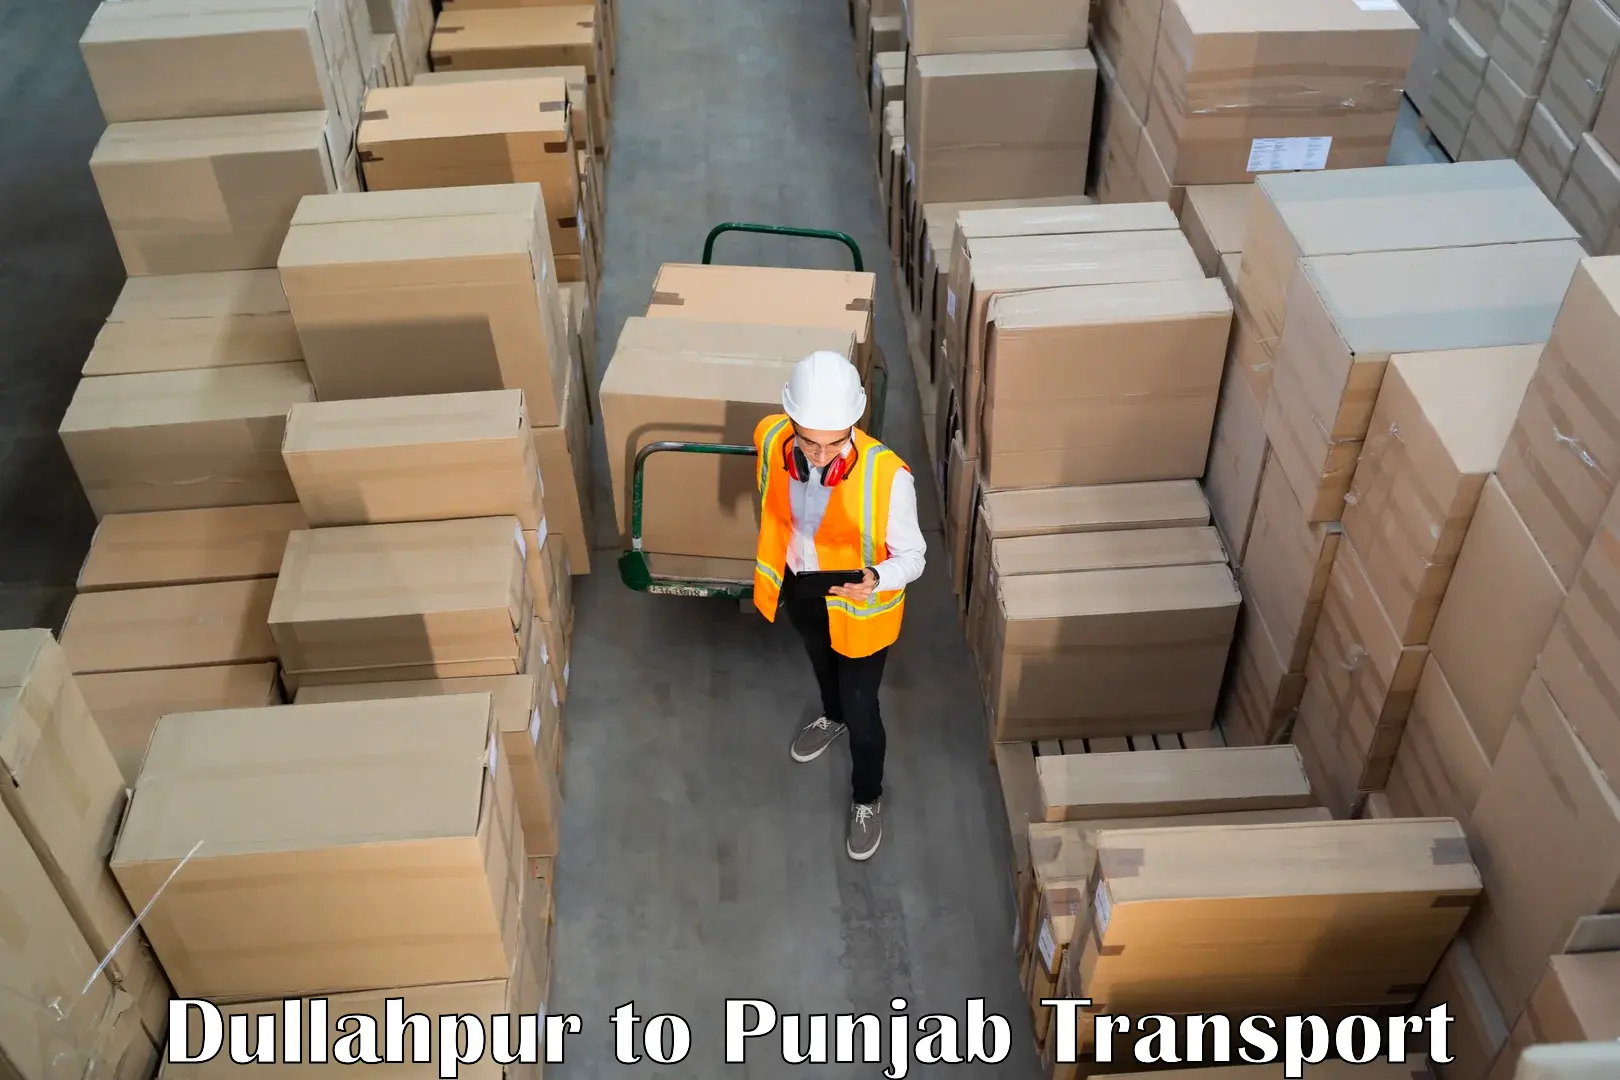 Nationwide transport services Dullahpur to Sirhind Fatehgarh